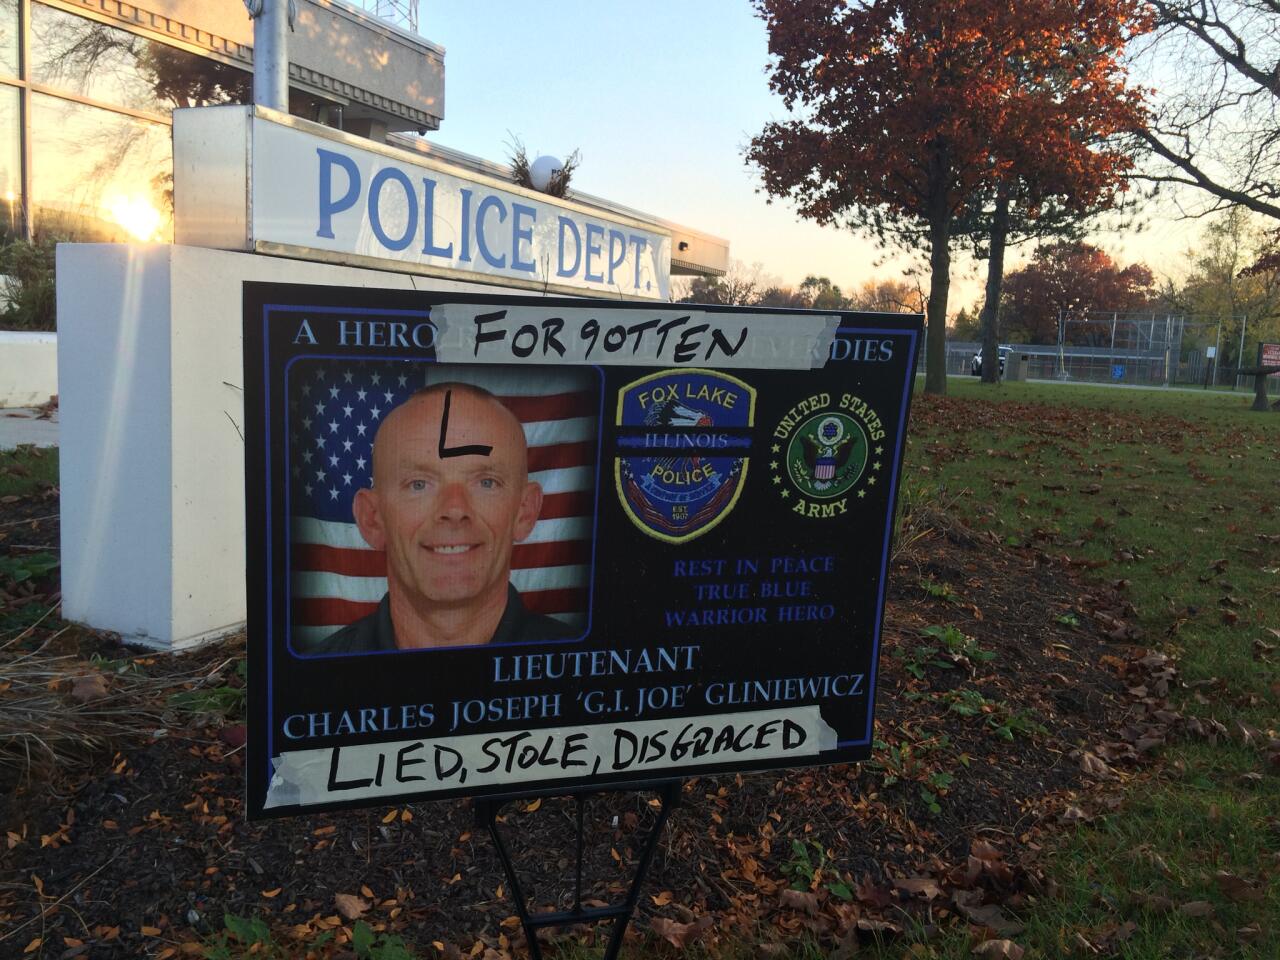 A sign honoring Lt. Charles Joseph "G.I. Joe" Gliniewicz is defaced outside Fox Lake Police Department on Nov. 4, 2015.